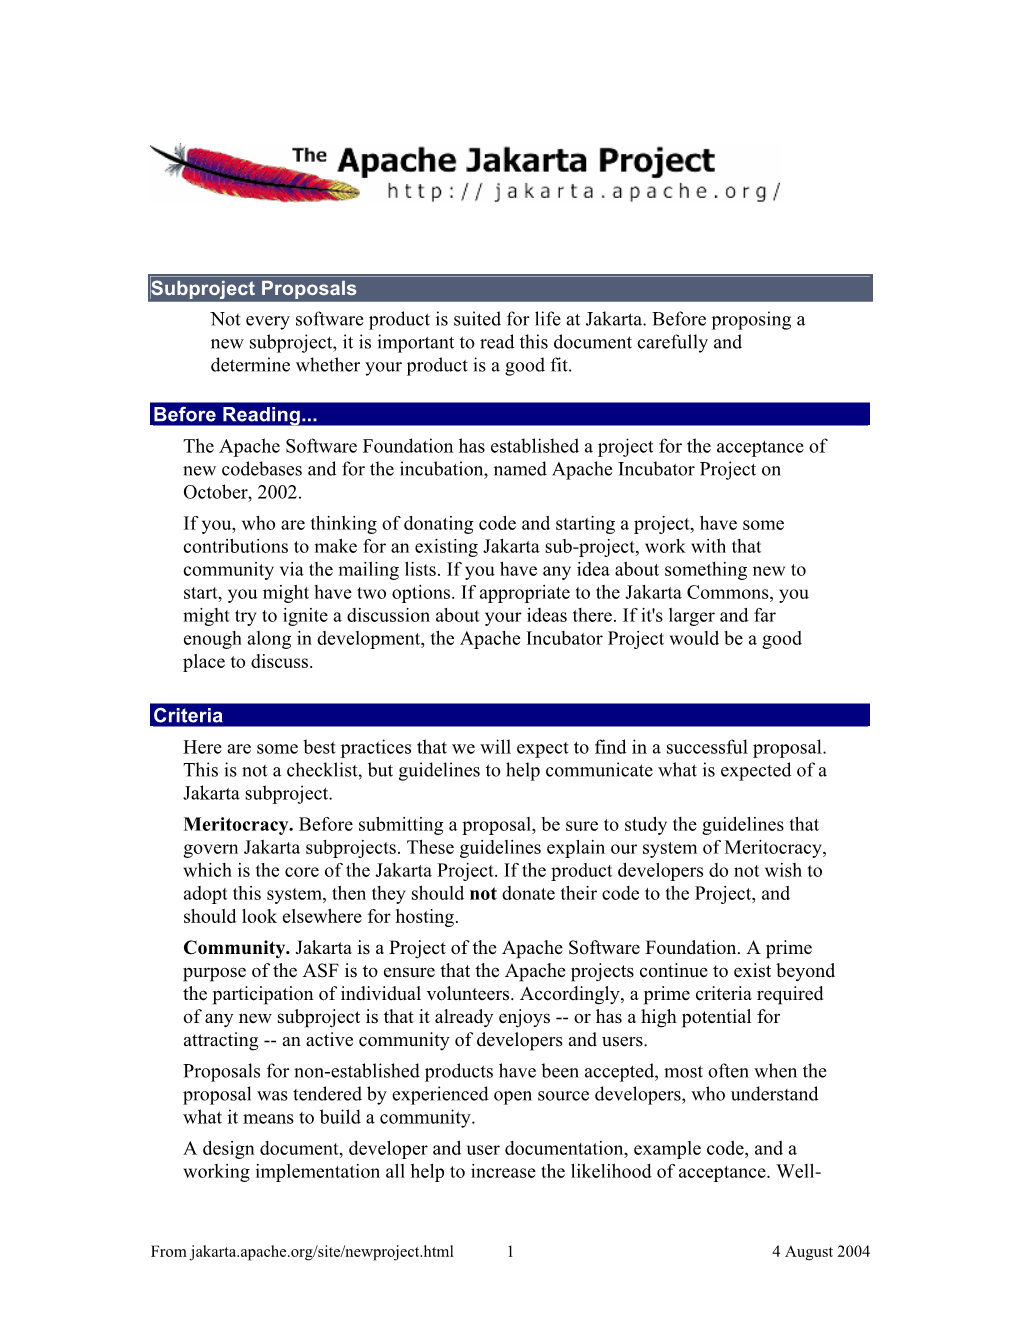 Subproject Proposals Not Every Software Product Is Suited for Life at Jakarta